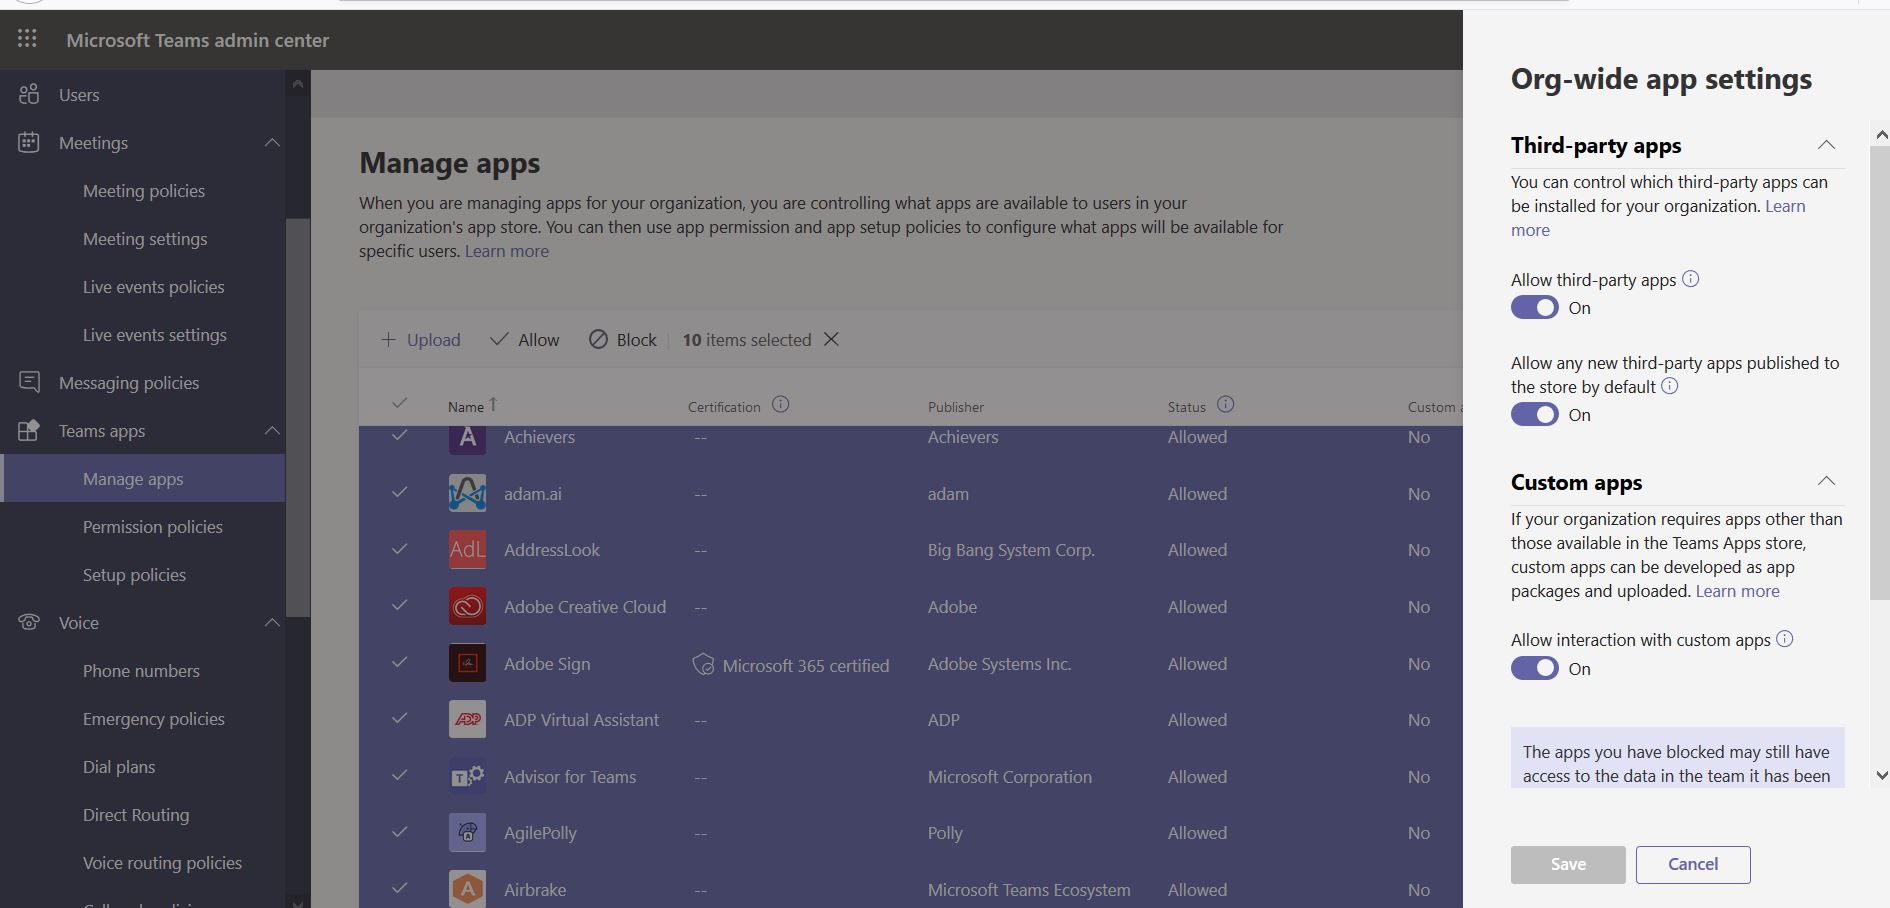 Manage apps in Microsoft Teams, how to manage the Org-wide app settings